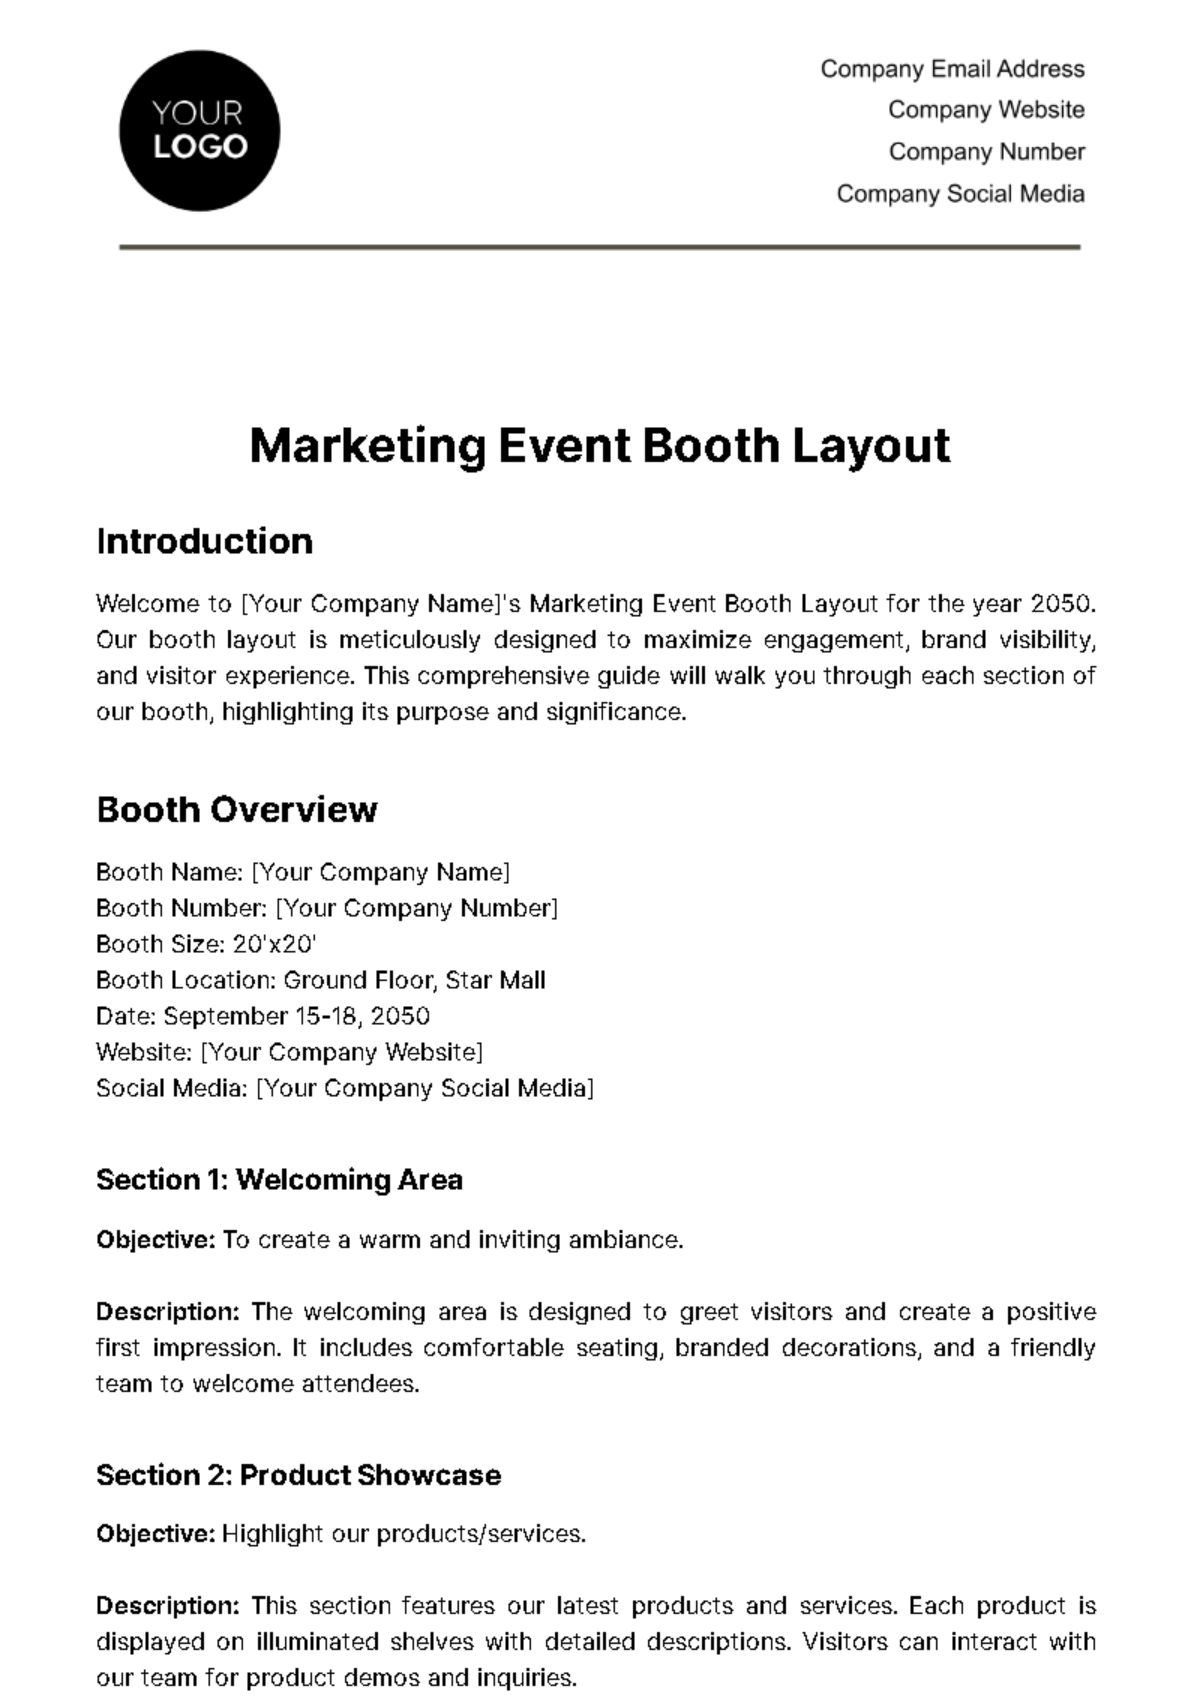 Free Marketing Event Booth Layout Template